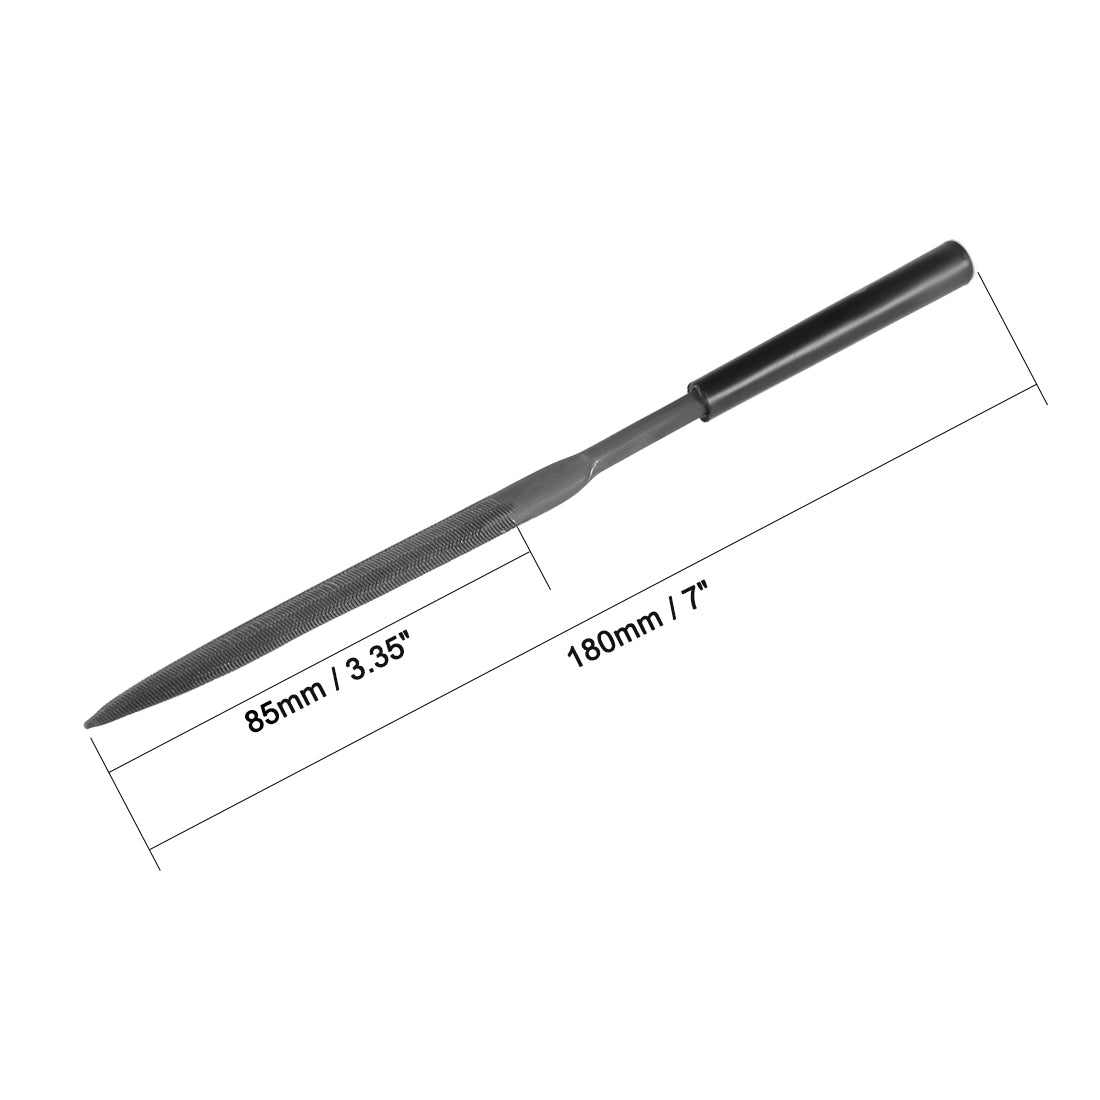 uxcell Uxcell Second Cut Steel Half Round Needle File with Plastic Handle, 5mm x 180mm